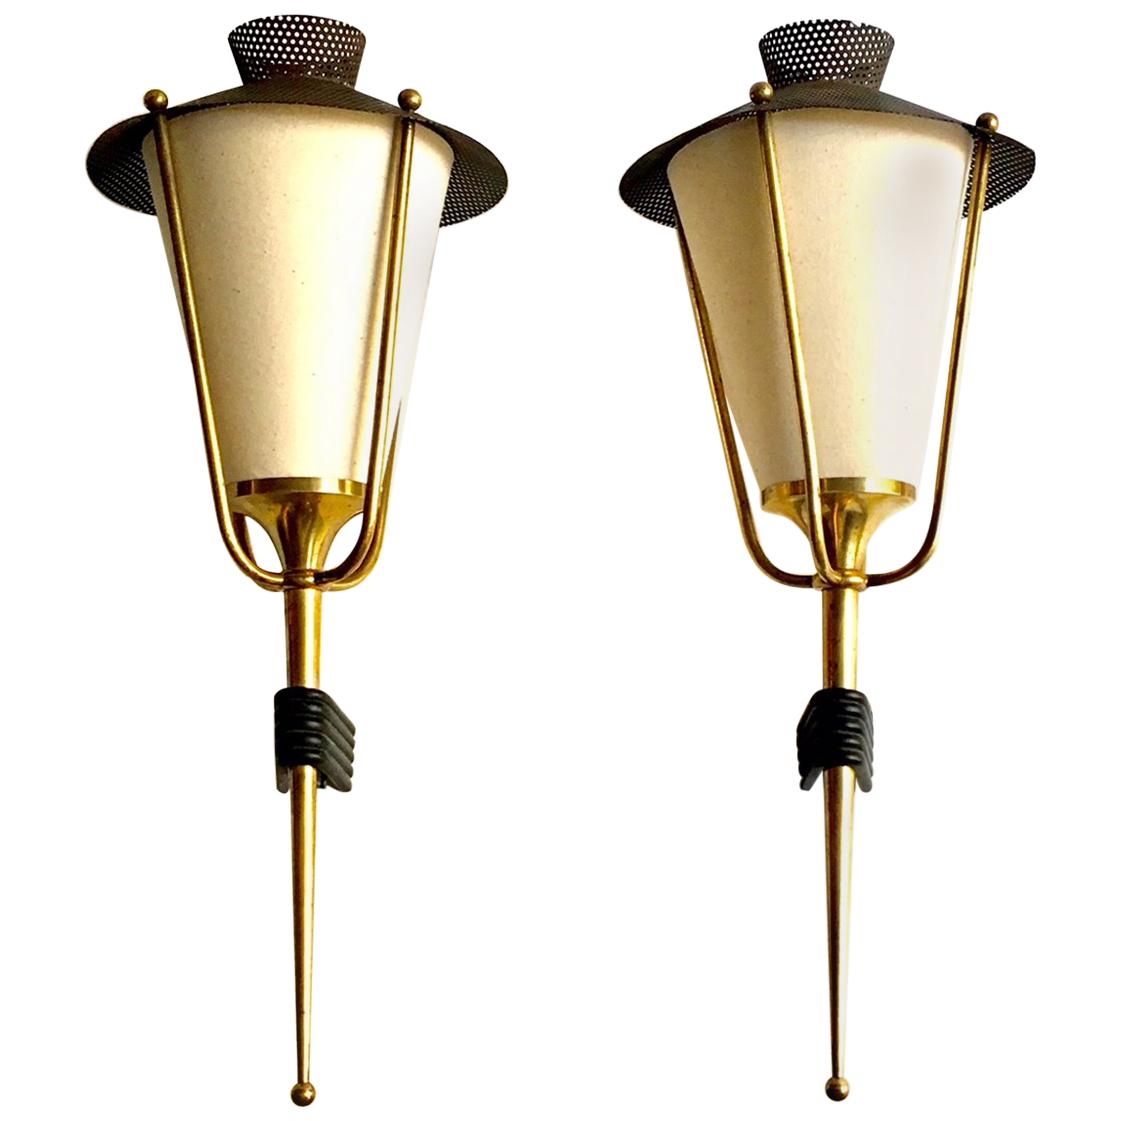 Pair of Miod Century French Sconces by Maison Arlus